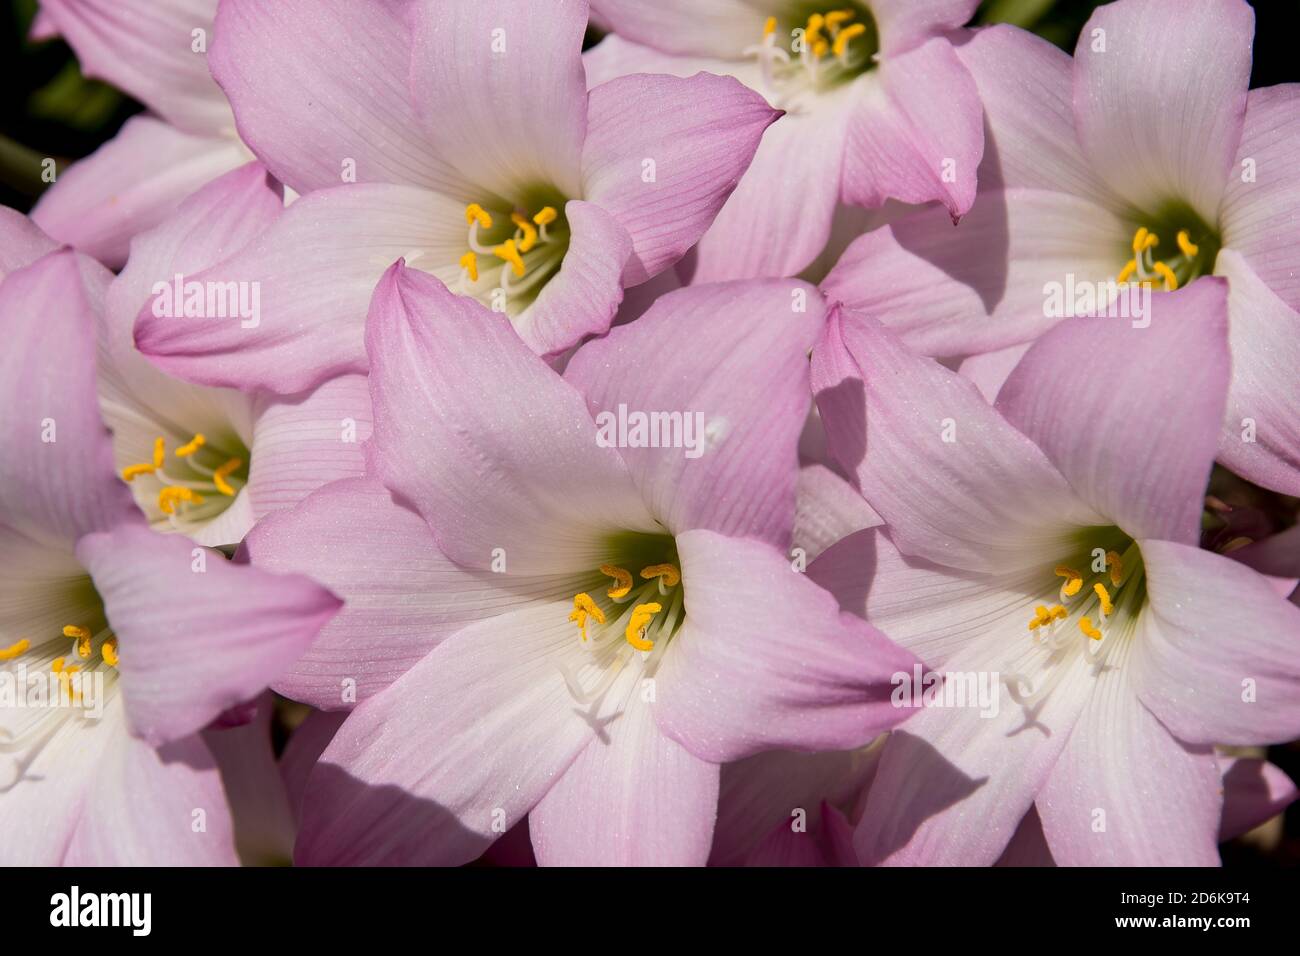 Pink and white rain lily flowers (zephyranthes grandiflora). Bulbs come into flower within hours of rainfall in summer. Australian private garden. Stock Photo